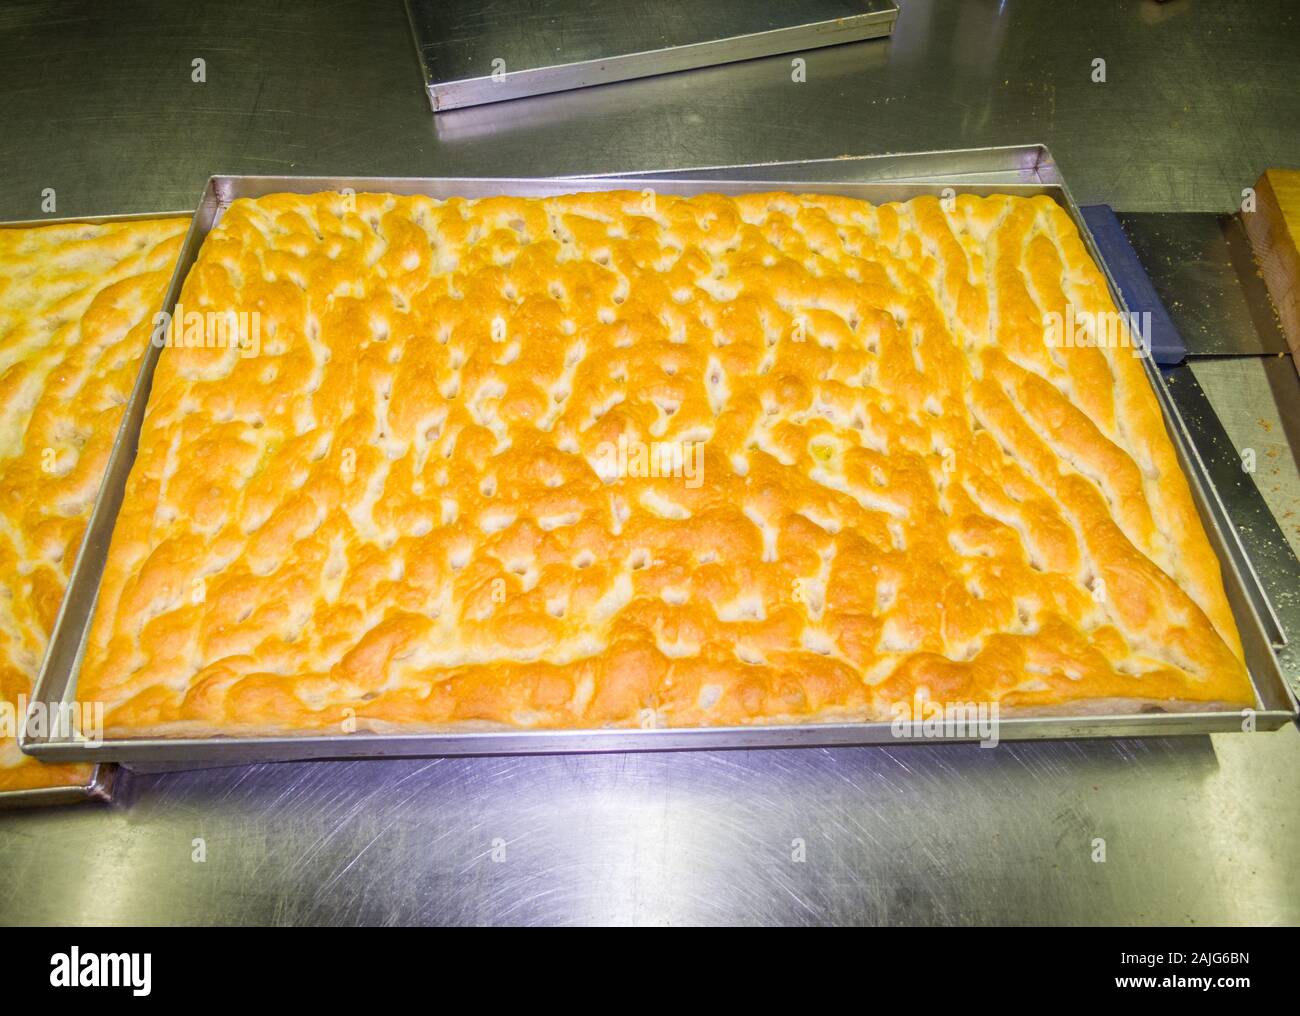 A tray of focaccia Genovese out of the oven, focaccia is a flat oven-baked Italian bread product, traditional recipe from Liguria region Stock Photo